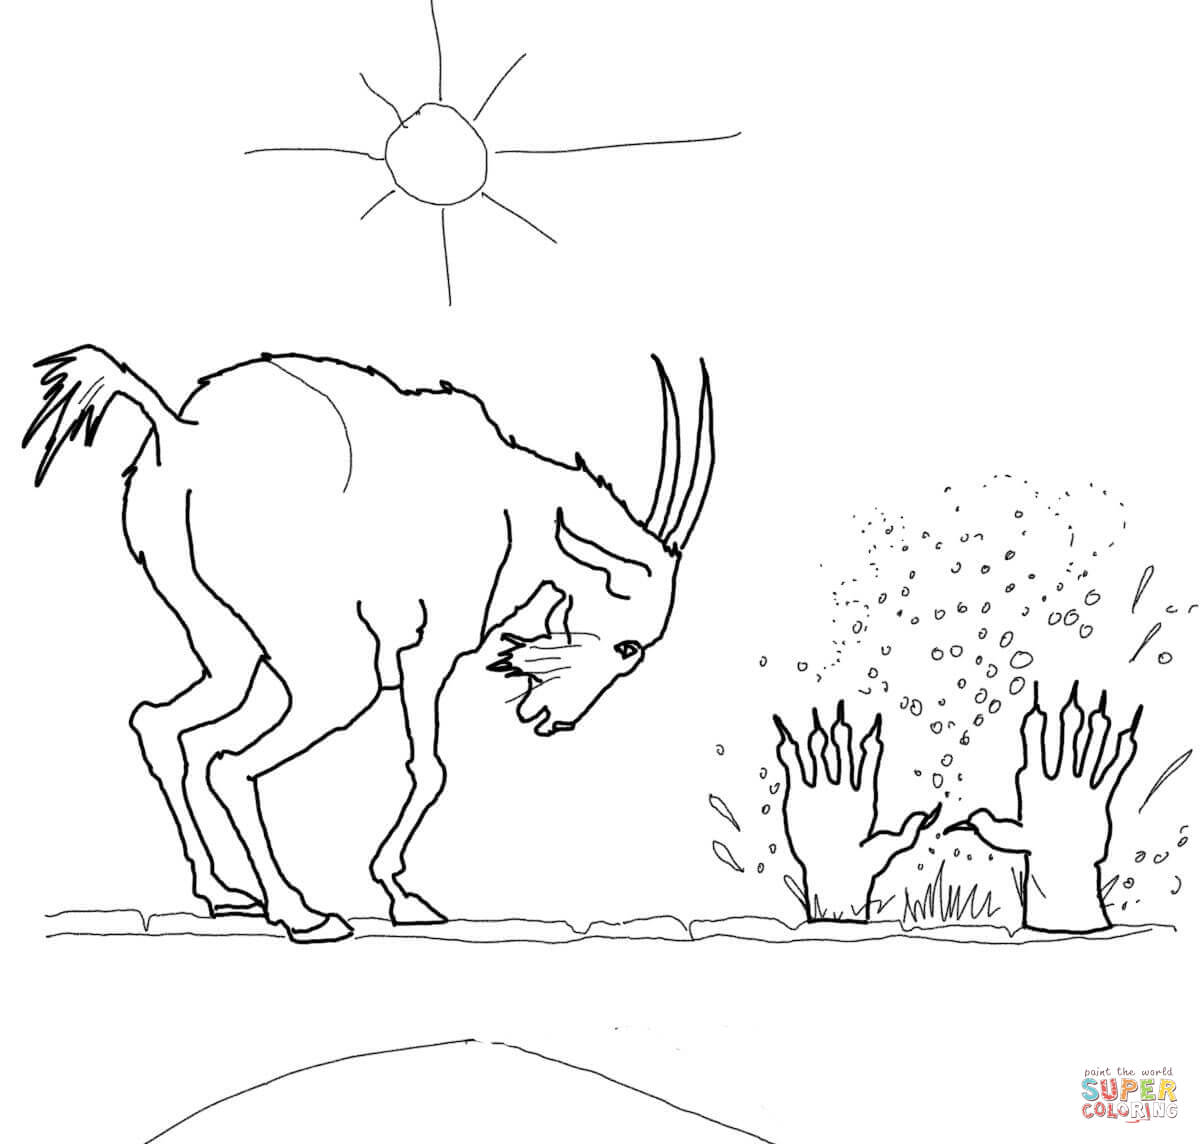 Three billy goats gruff coloring pages | Free Coloring Pages